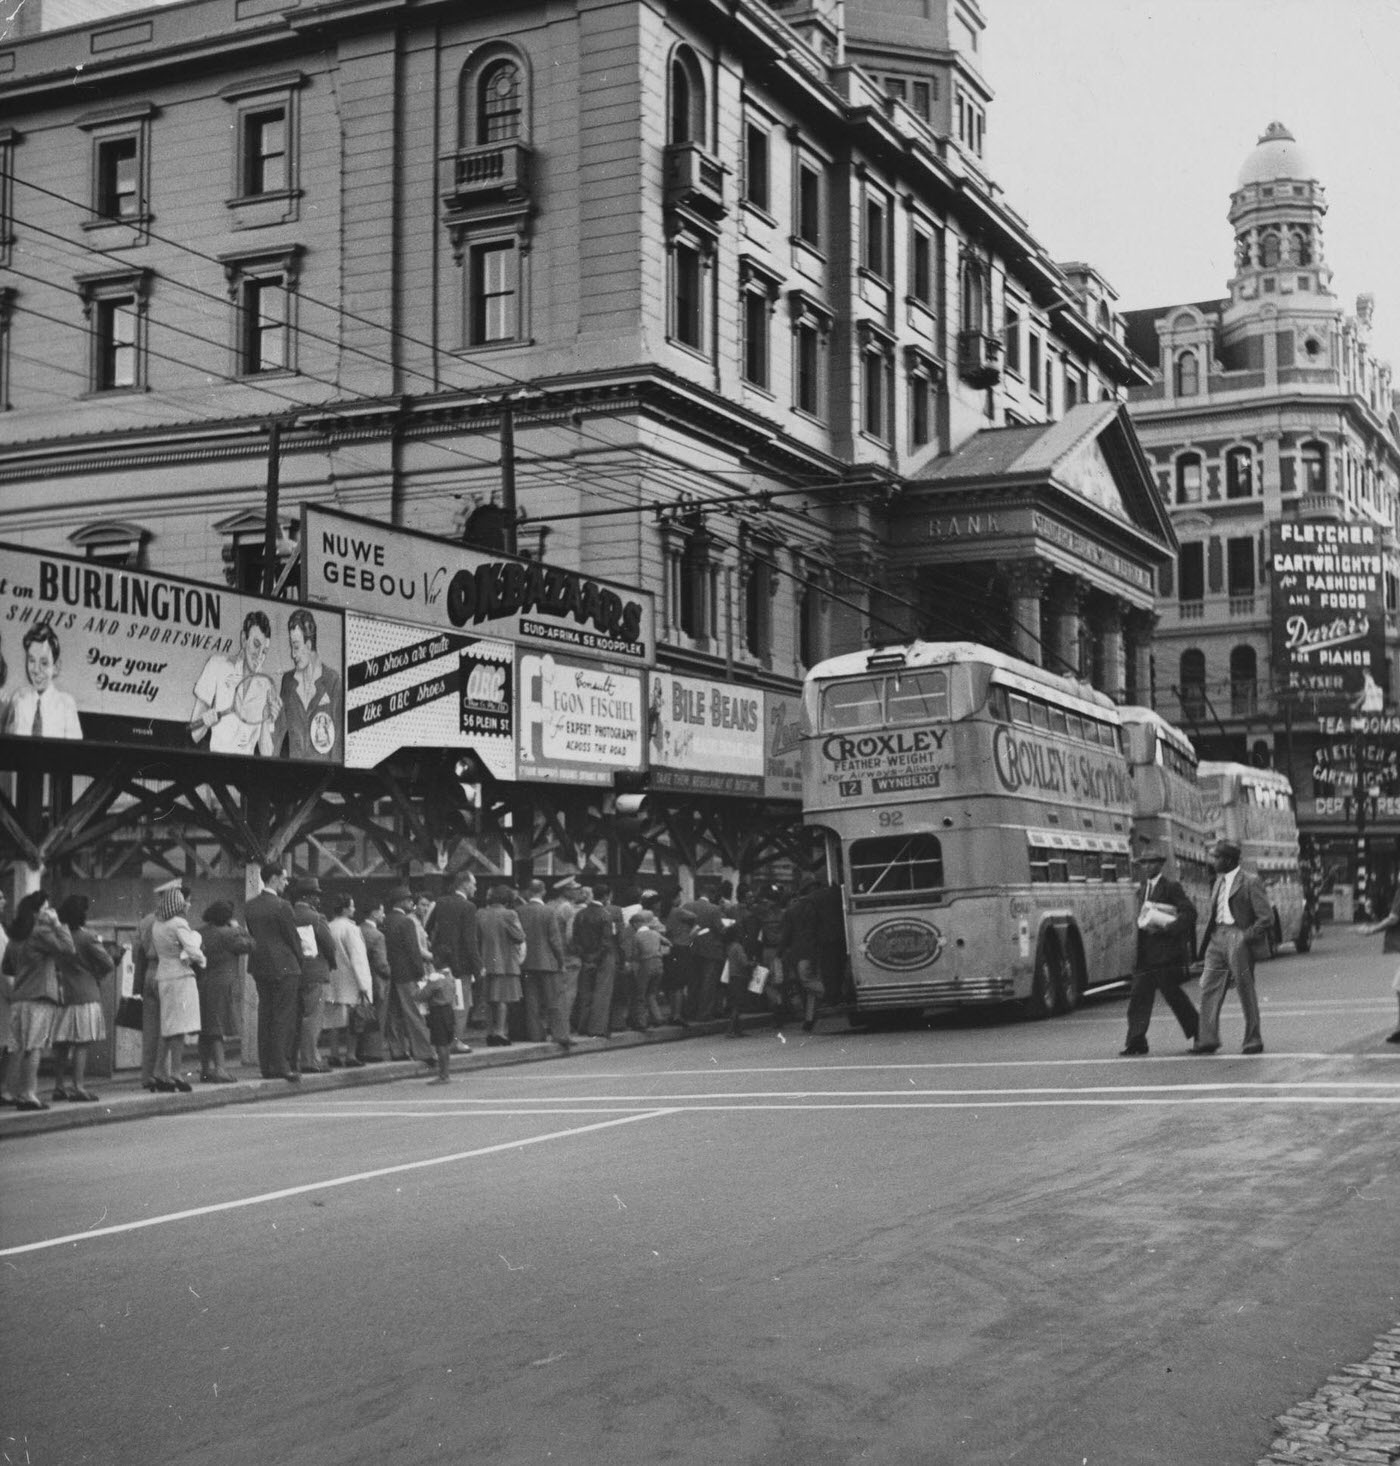 People slowly file onto a double-decker bus parked outside a bank, in Adderley Street.